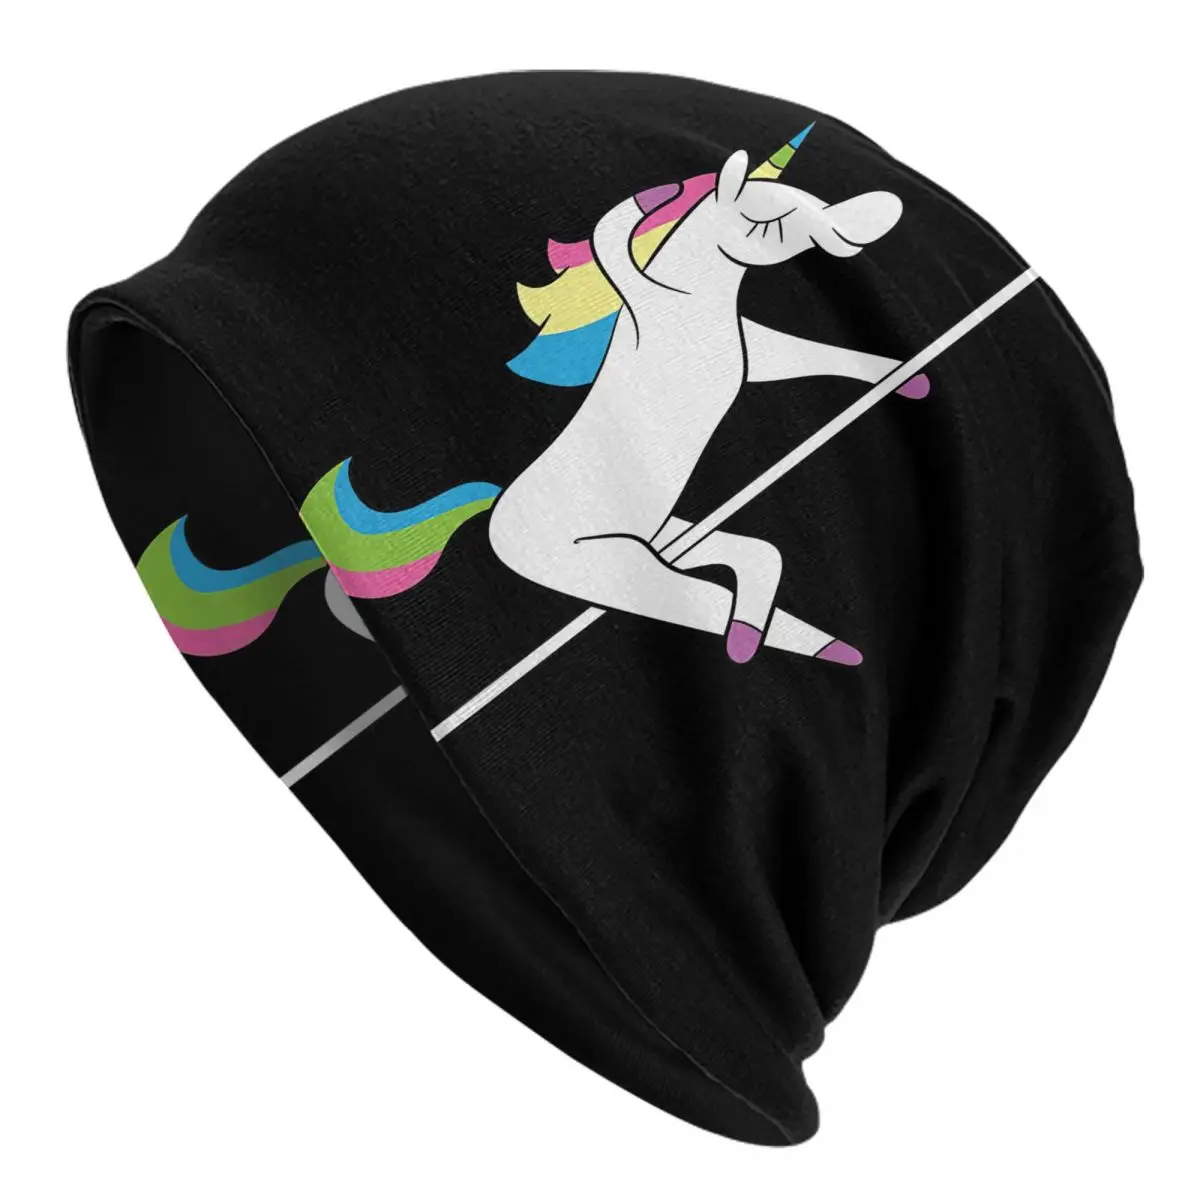 Pole Dance - Unicorn Dancing On The Pole Funny Adult Men's Women's Knit Hat Keep warm winter knitted hat